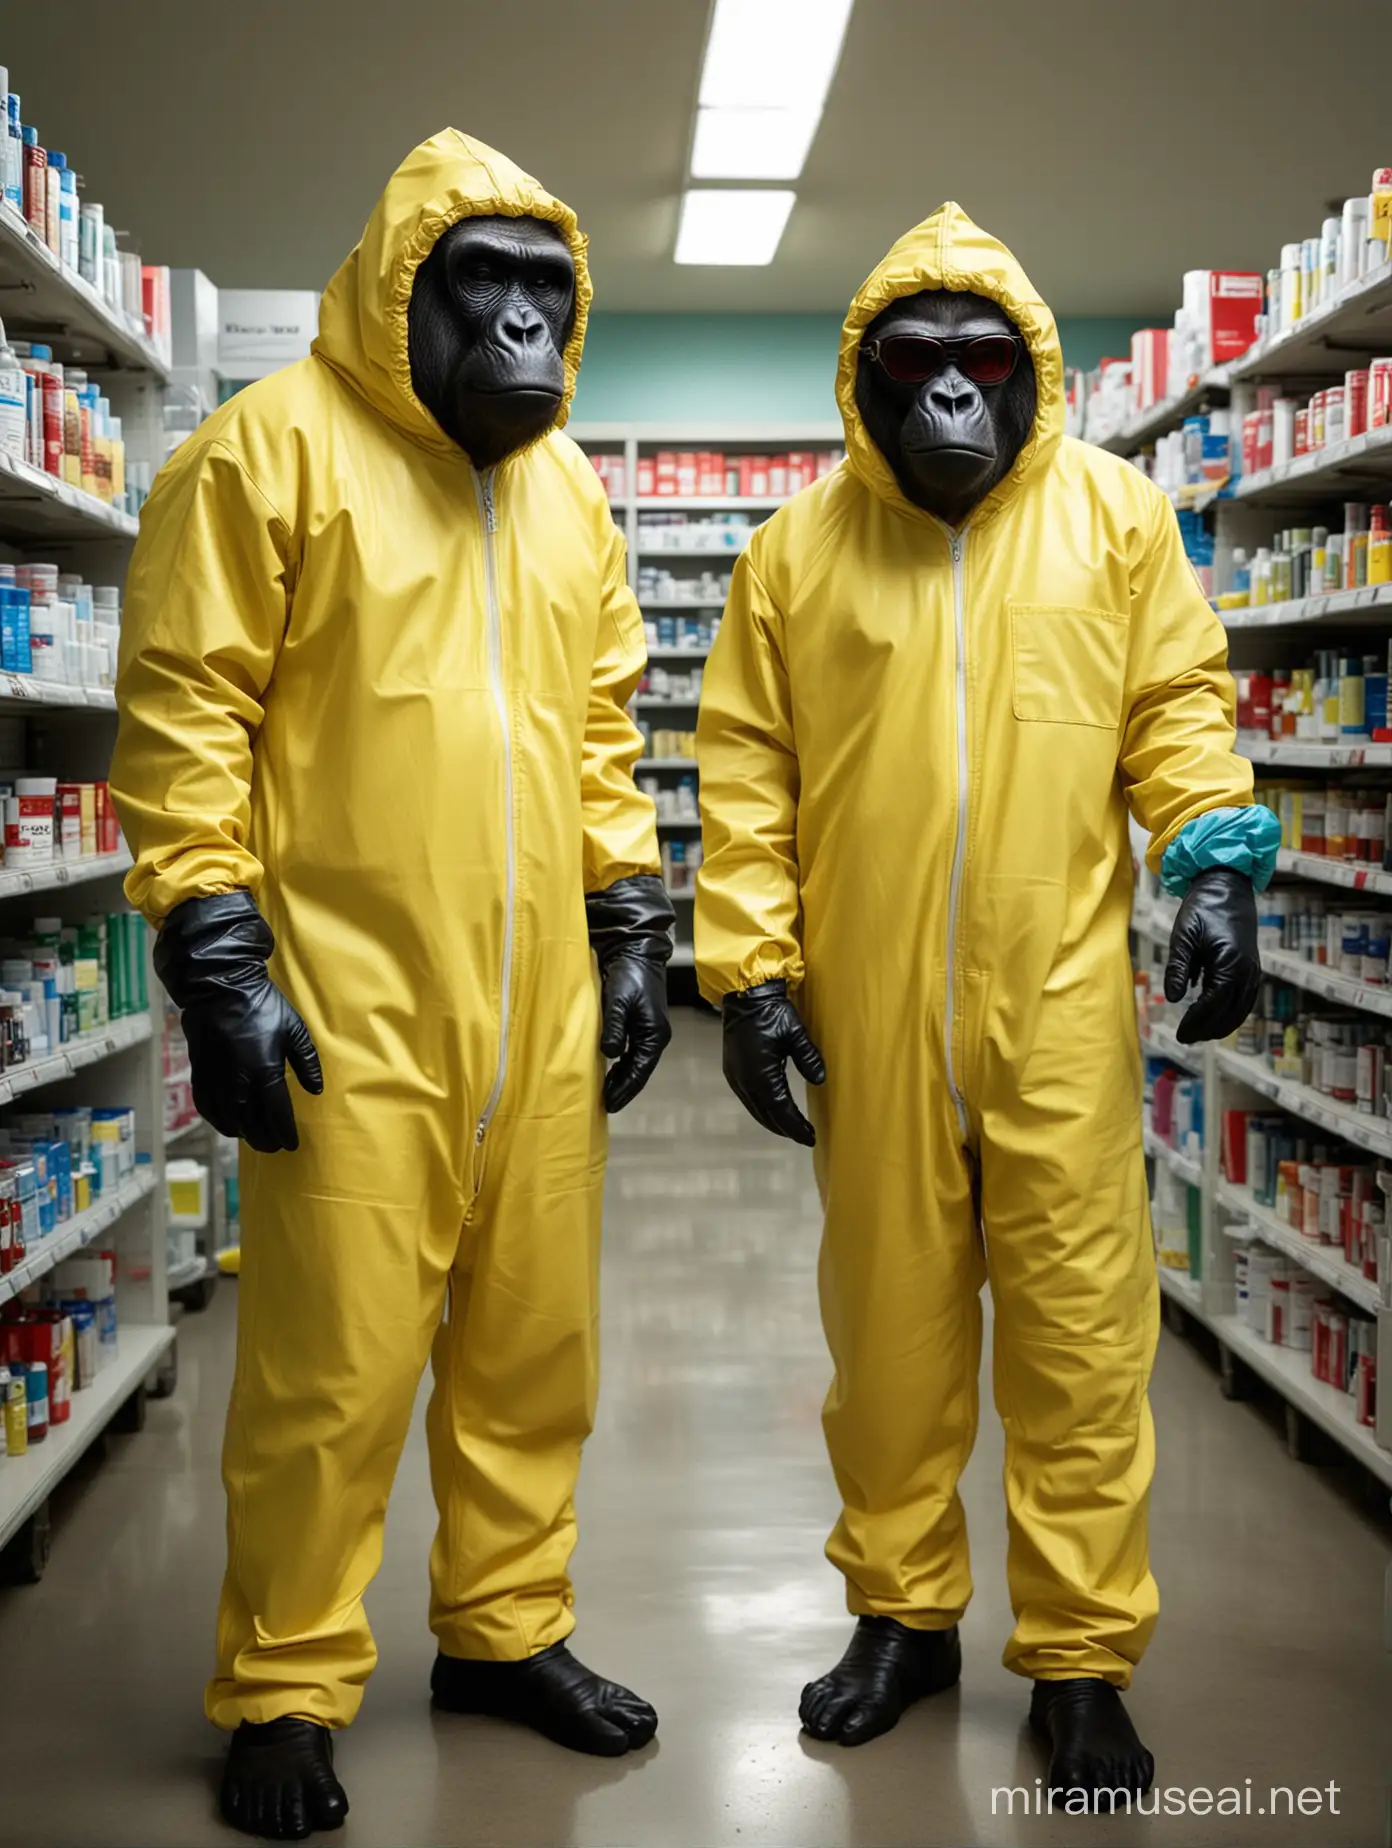 Defiant Gorillas in Breaking Bad Costumes Stand in Pharmacy Amid Medicines